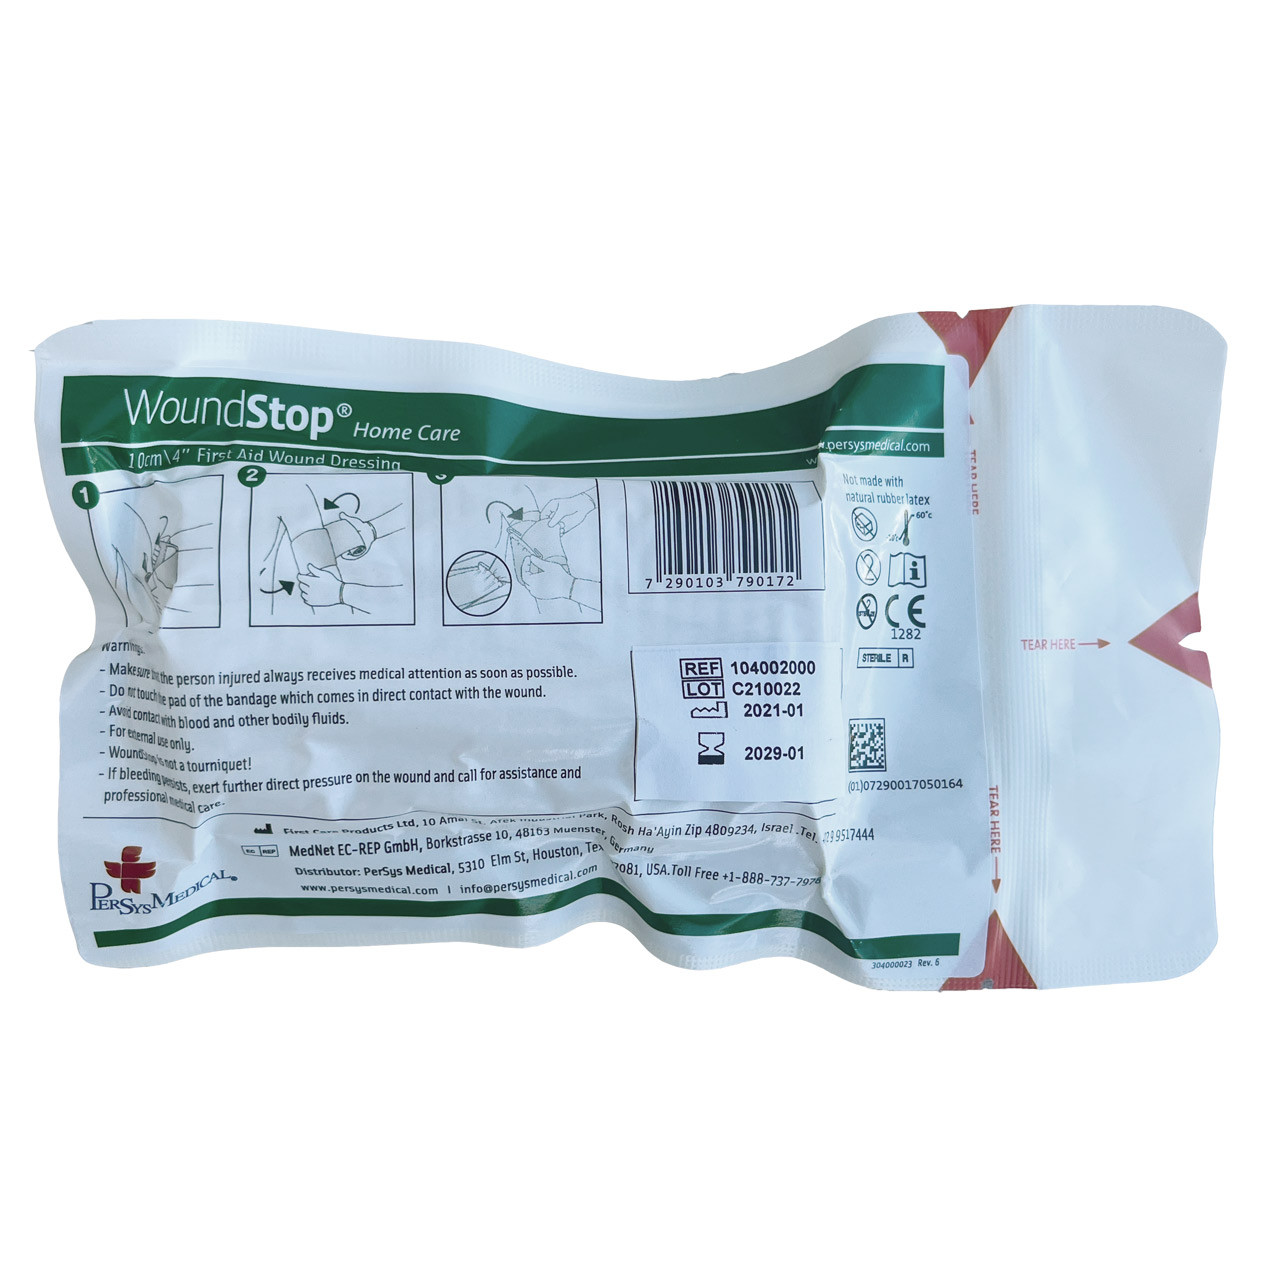 https://cdn11.bigcommerce.com/s-rd4j7/images/stencil/1280x1280/products/2153/19431/40-0249---WoundStop-Home-Care---First-Aid-Wound-Dressing---front-wrap---lores__63828.1698952780.jpg?c=2